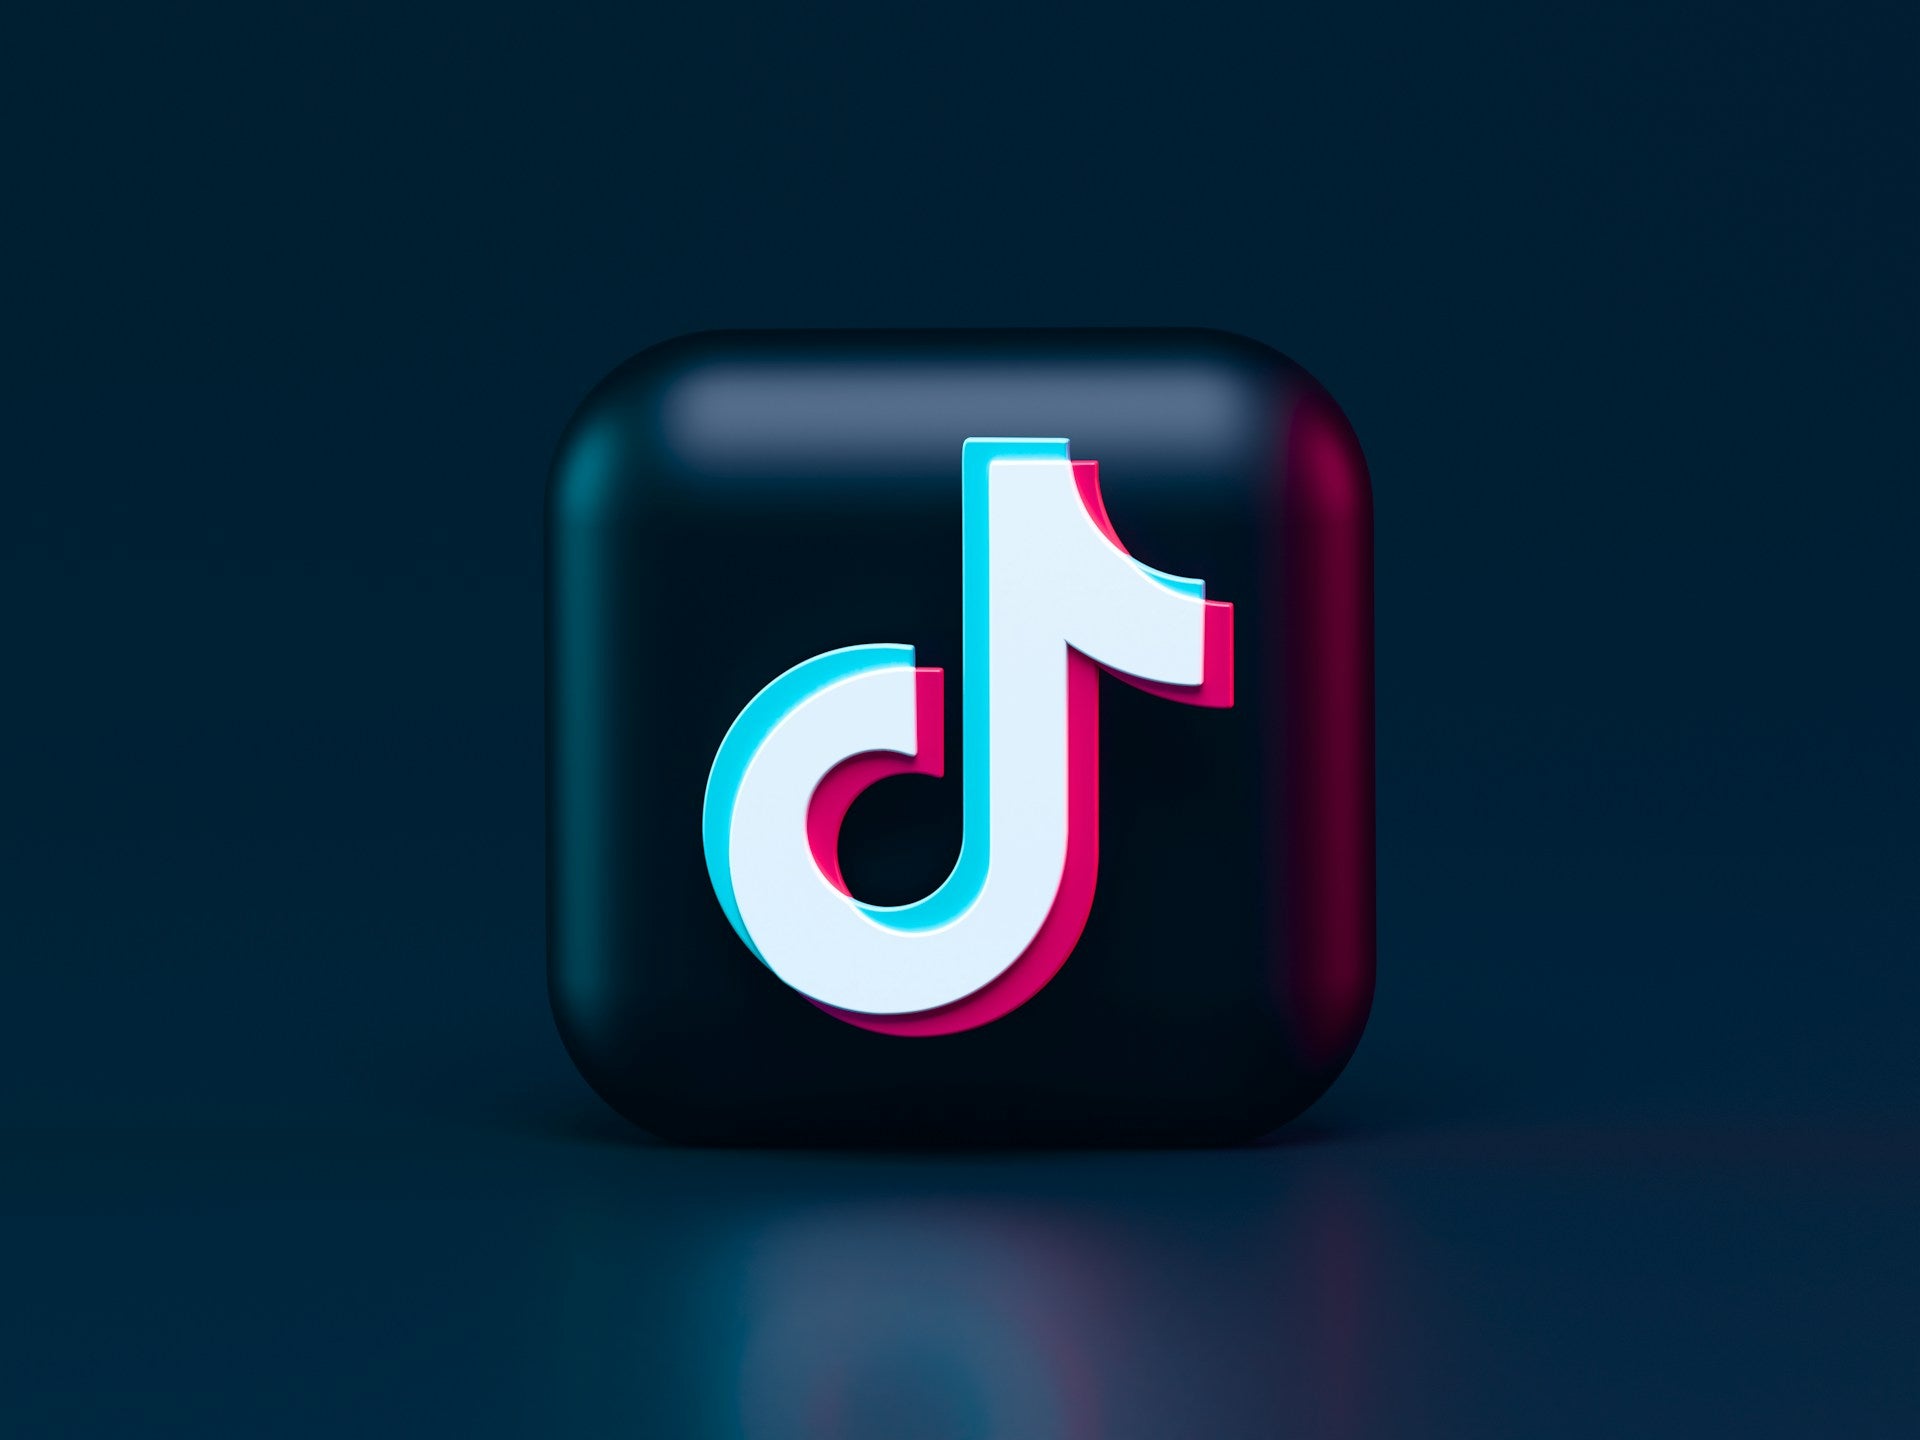 HeyWhatsNew: TikTok Has Been Given a 9 Month Deadline, and Drake Faces a Lawsuit for AI-generated Content